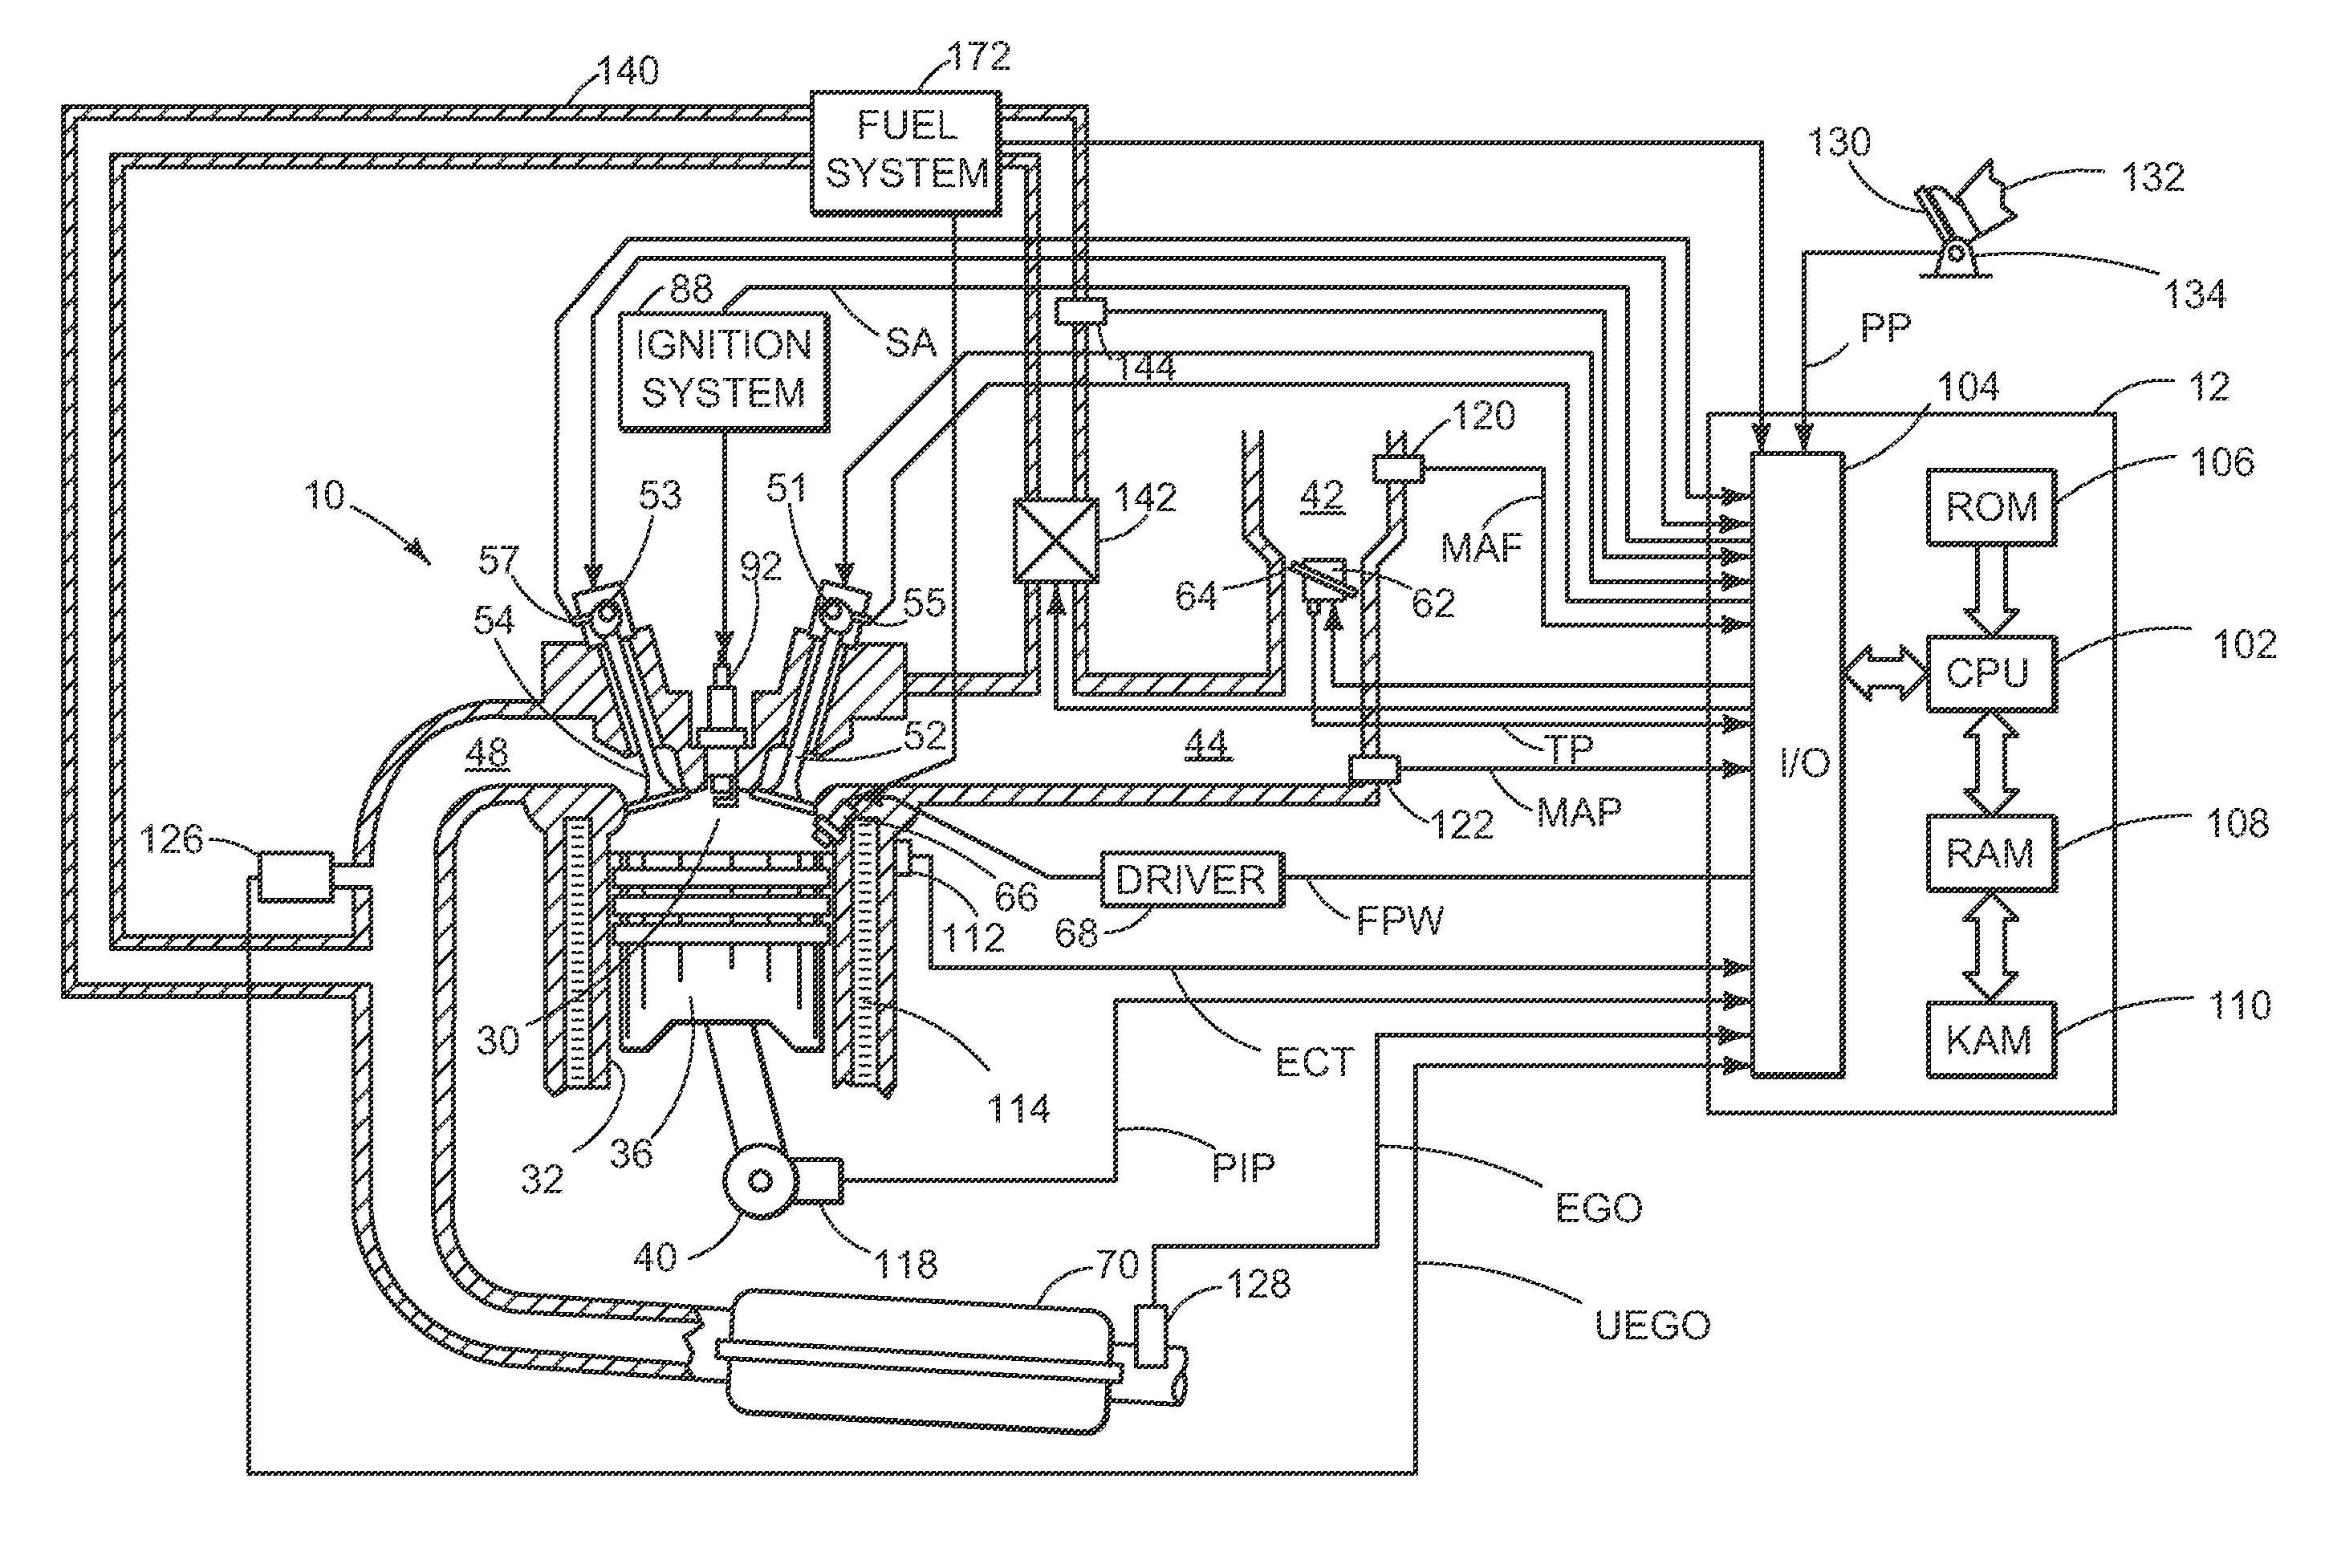 Multi-cylinder internal combustion engine and method for operating a multi-cylinder internal combustion engine